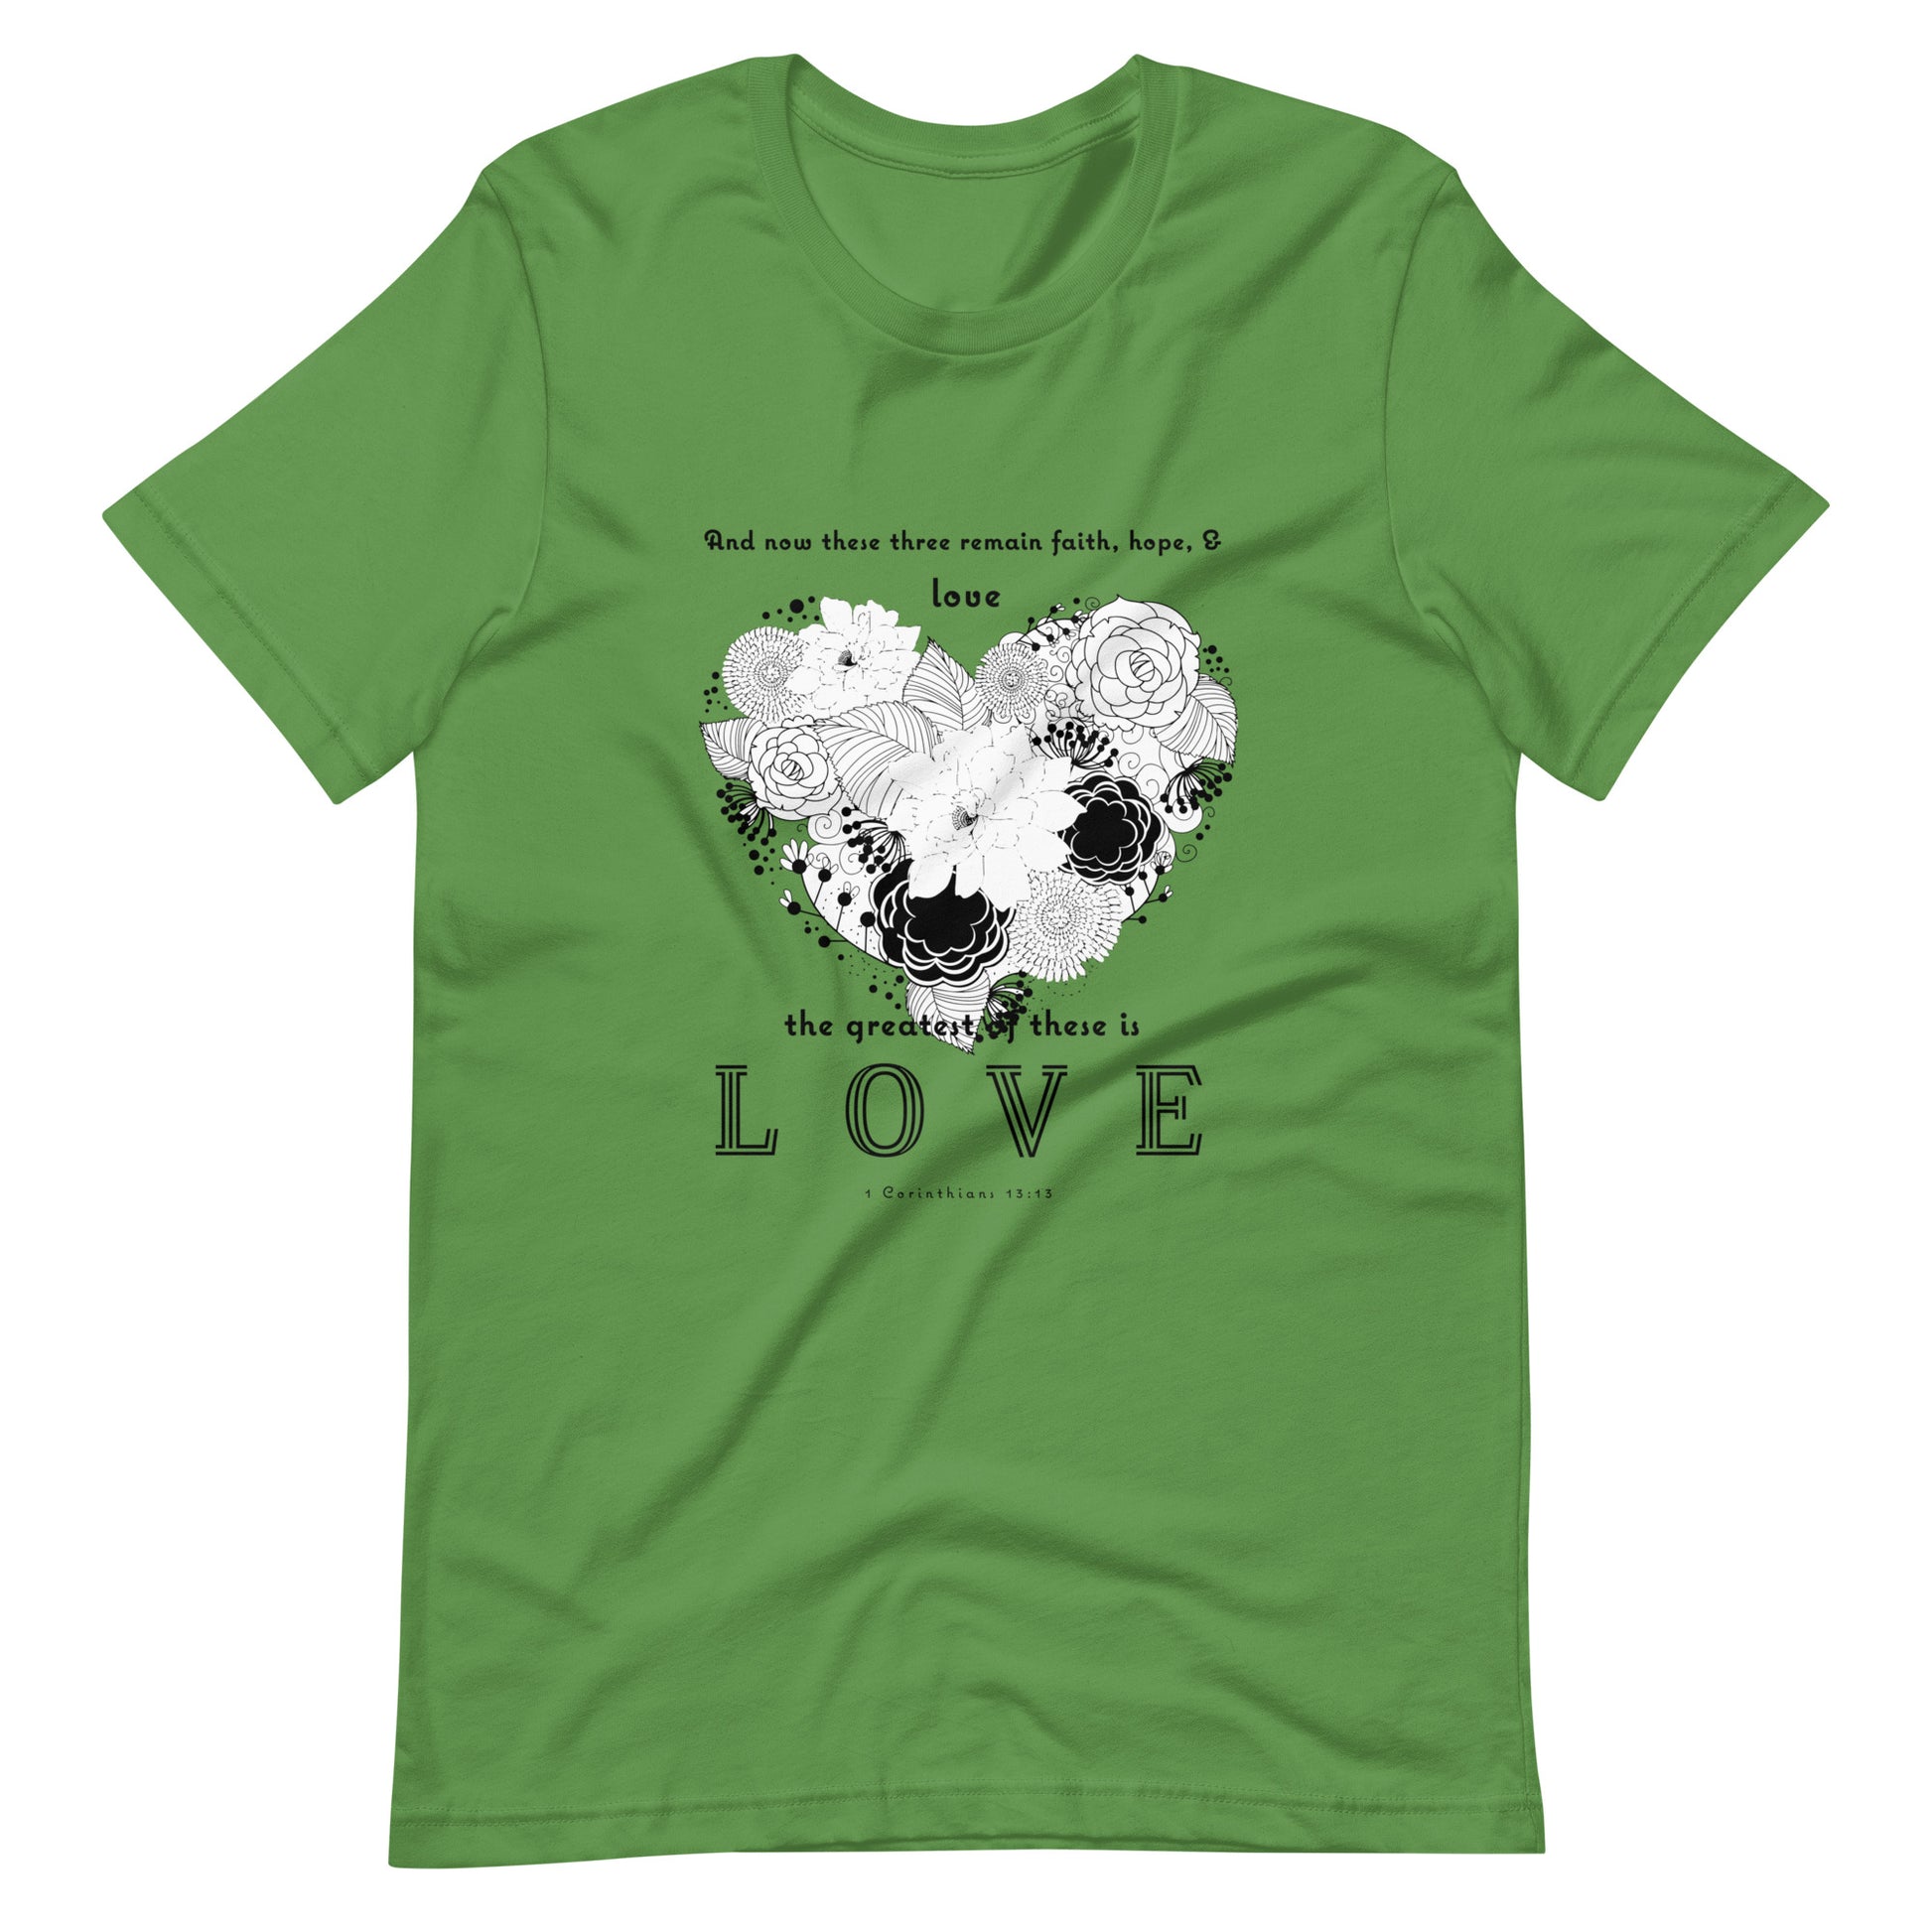 1 Corinthians 13:13 greatest love T-shirt in Leaf - front view